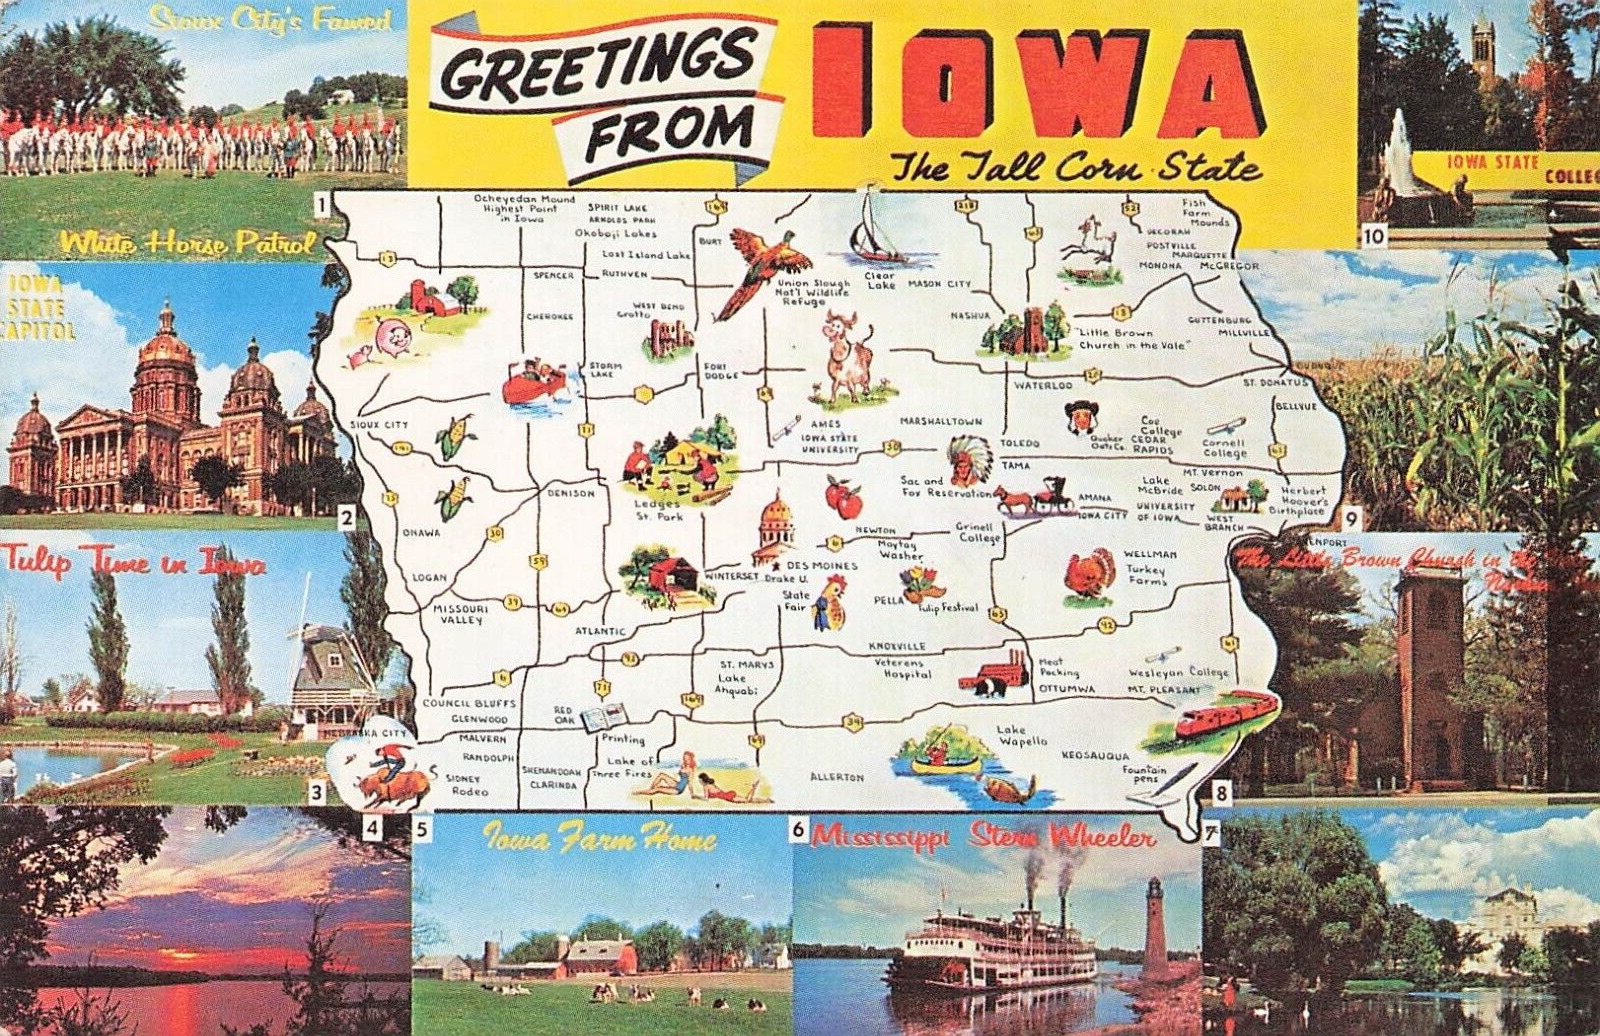 Greetings from Iowa The Tall Corn State  PM 1969